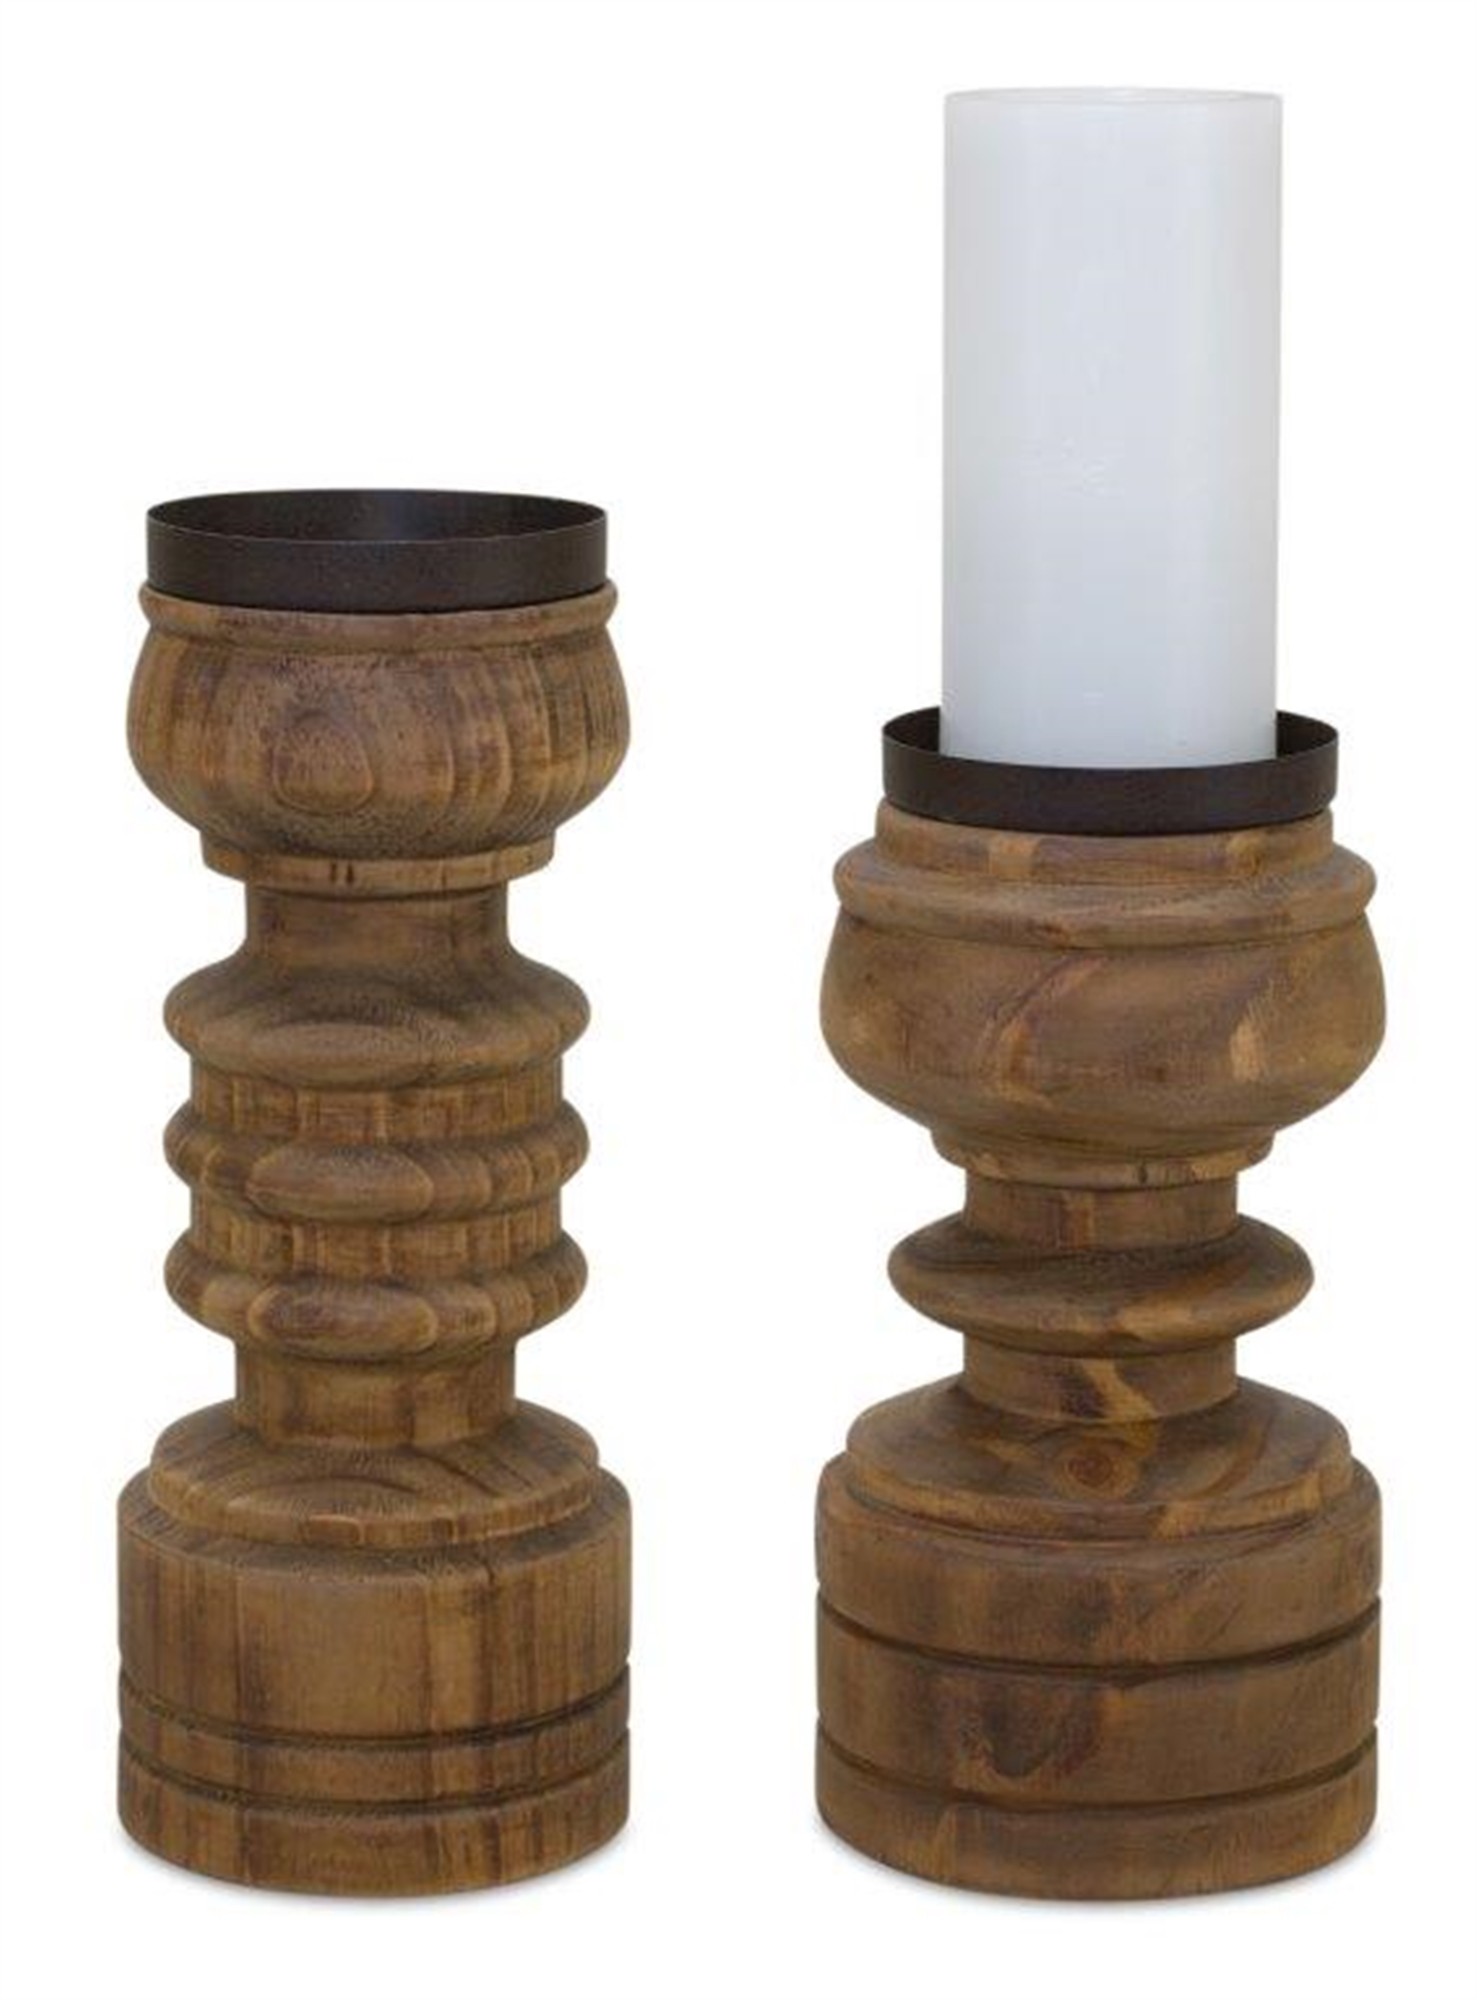 Candle Holder (Set of 2) 4.75"D x 9.75"H, 4.75"D x 12"H Wood